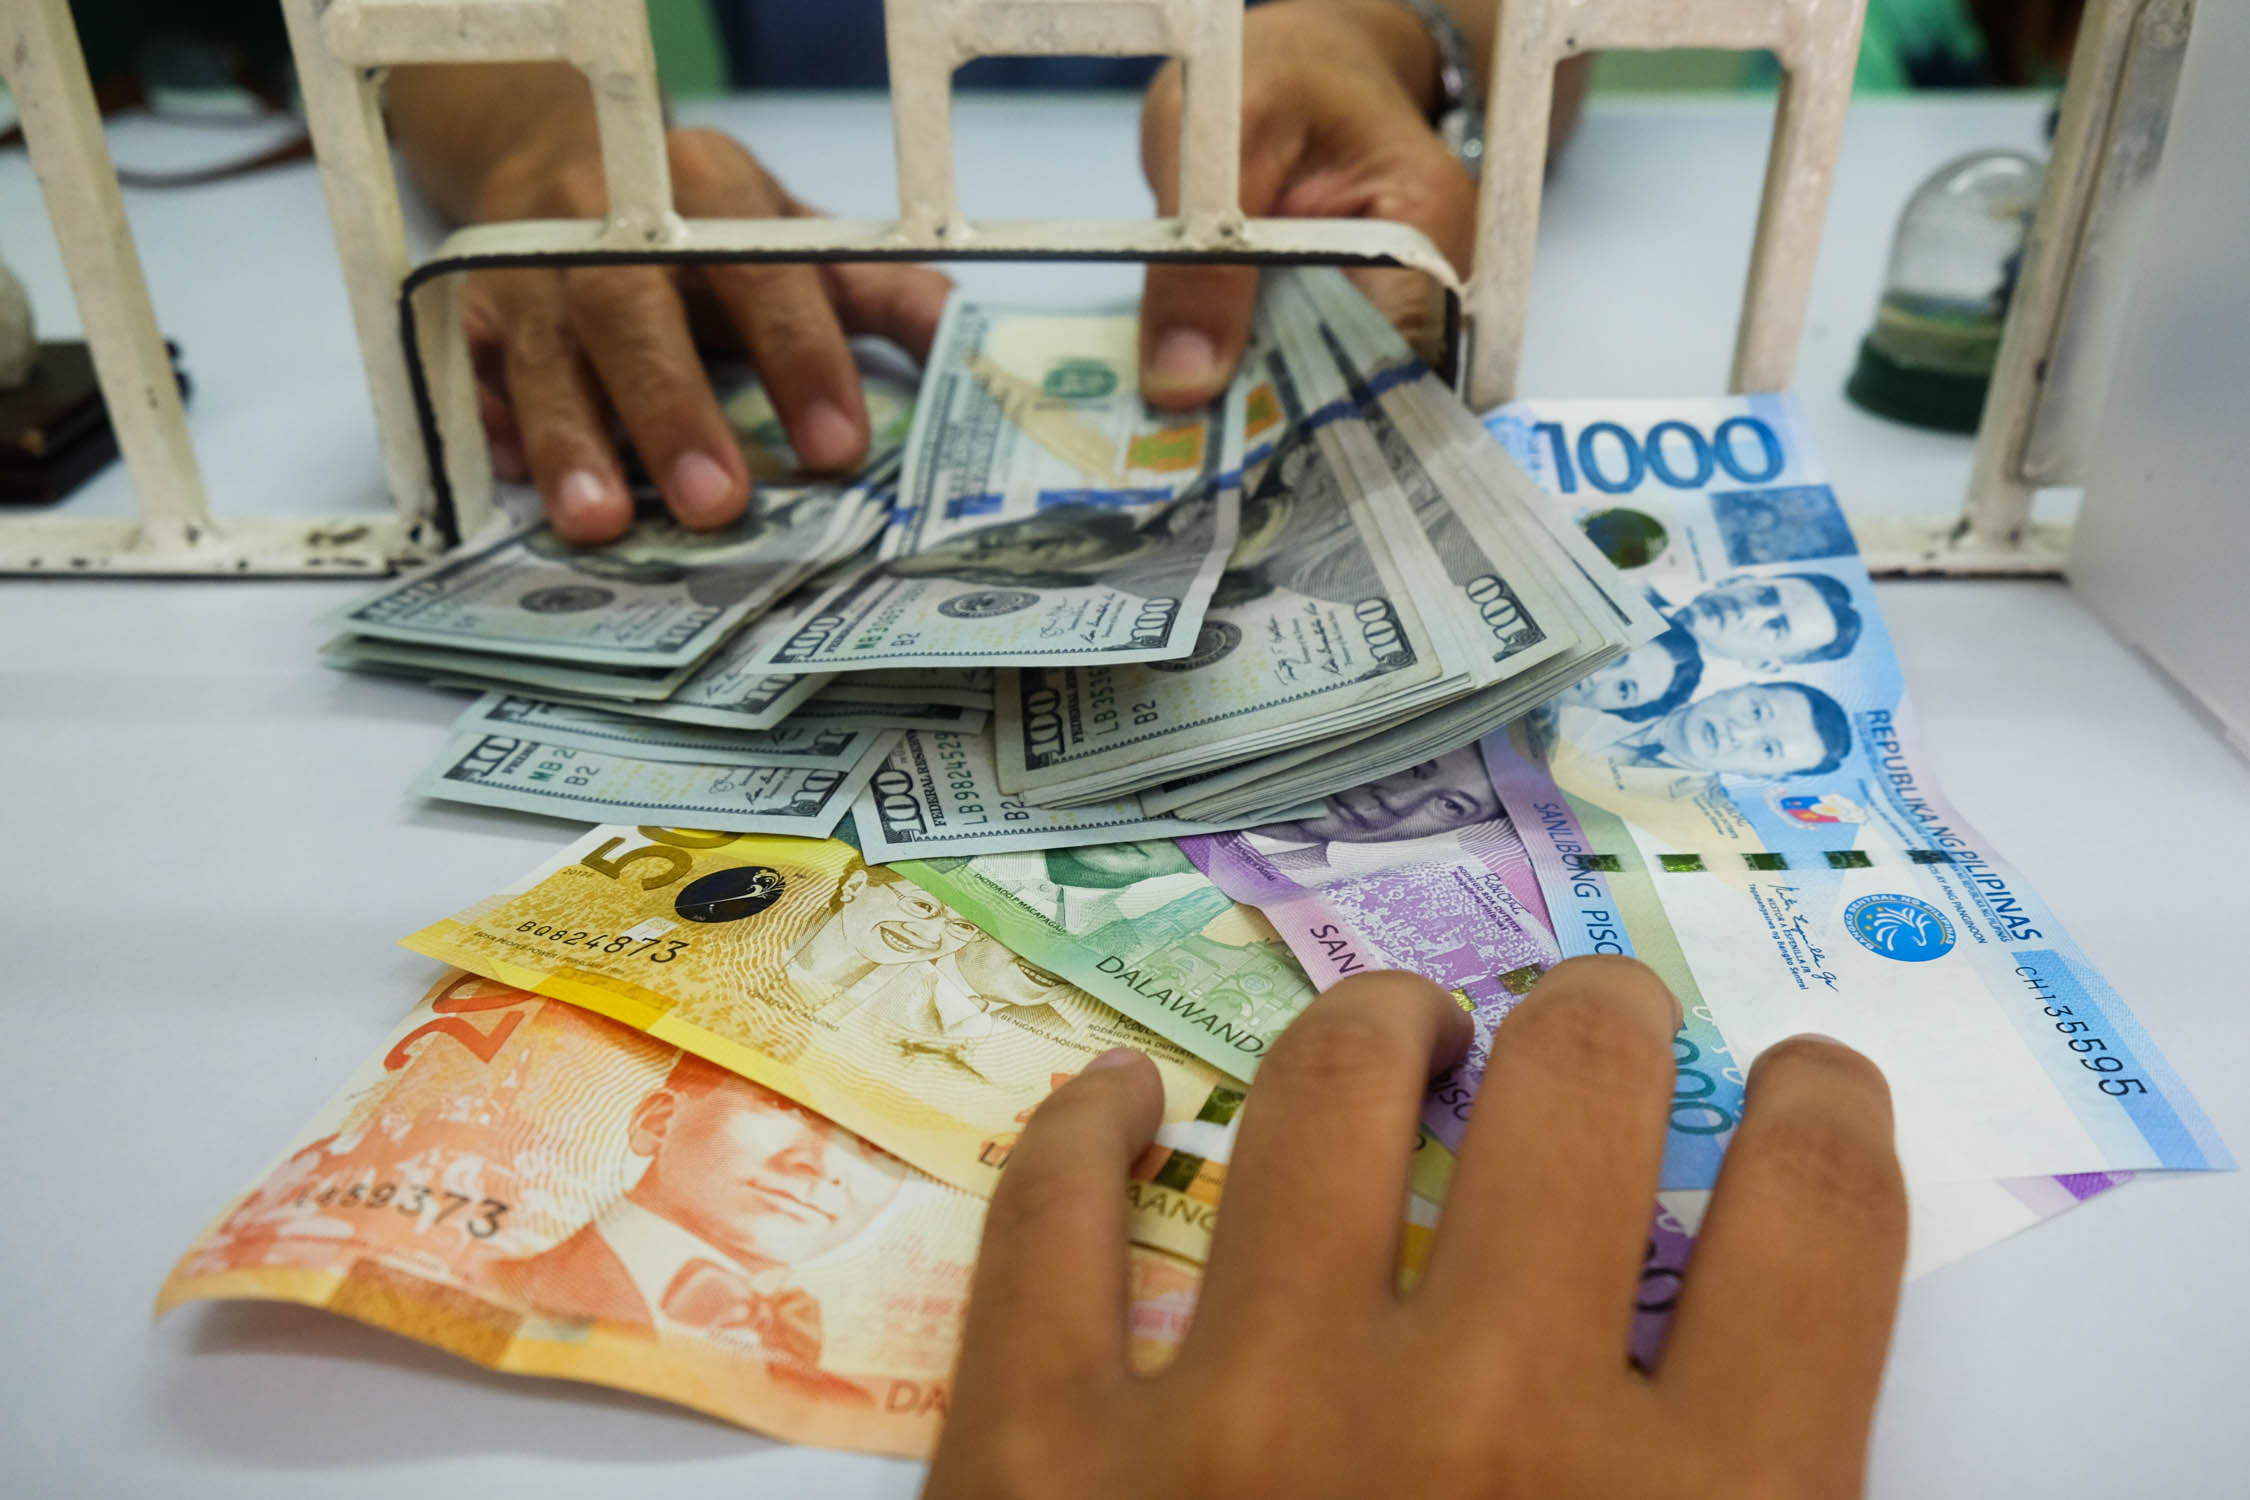 US Dollar To Philippine Peso Exchange Rate Today, Dollar To Peso, USD To  PHP